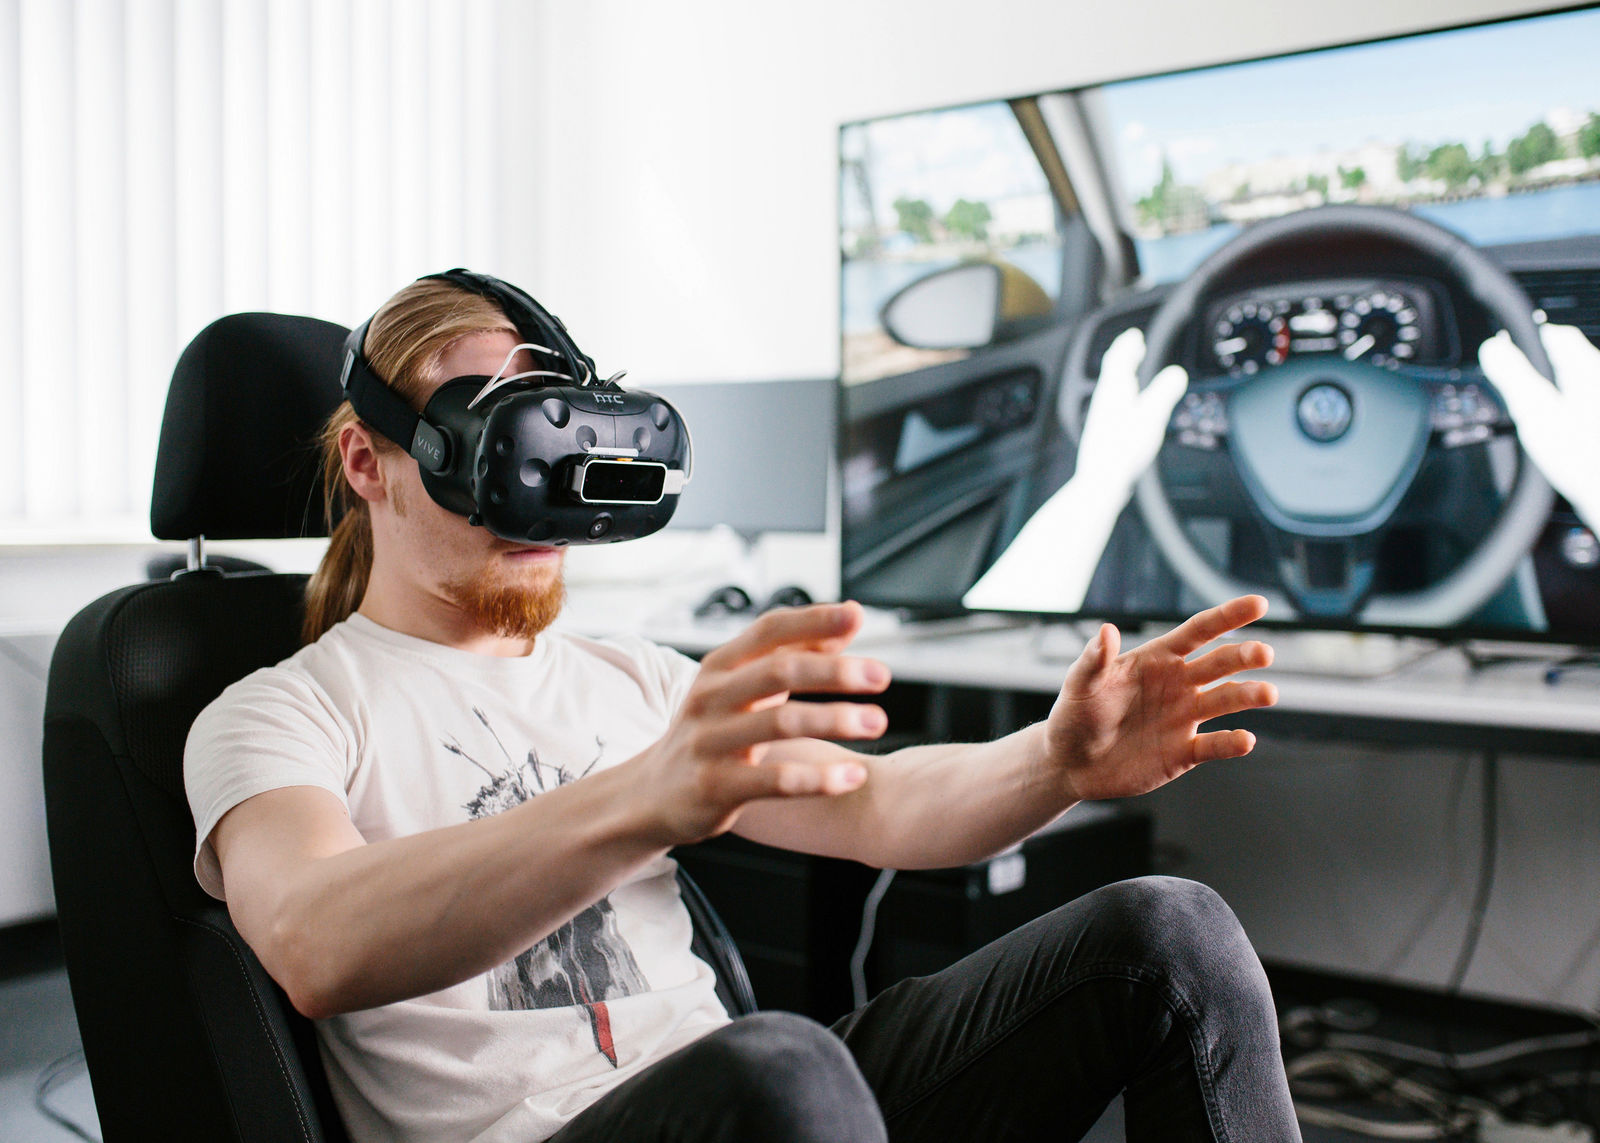 What does a … VR-Developer actually do at Volkswagen?